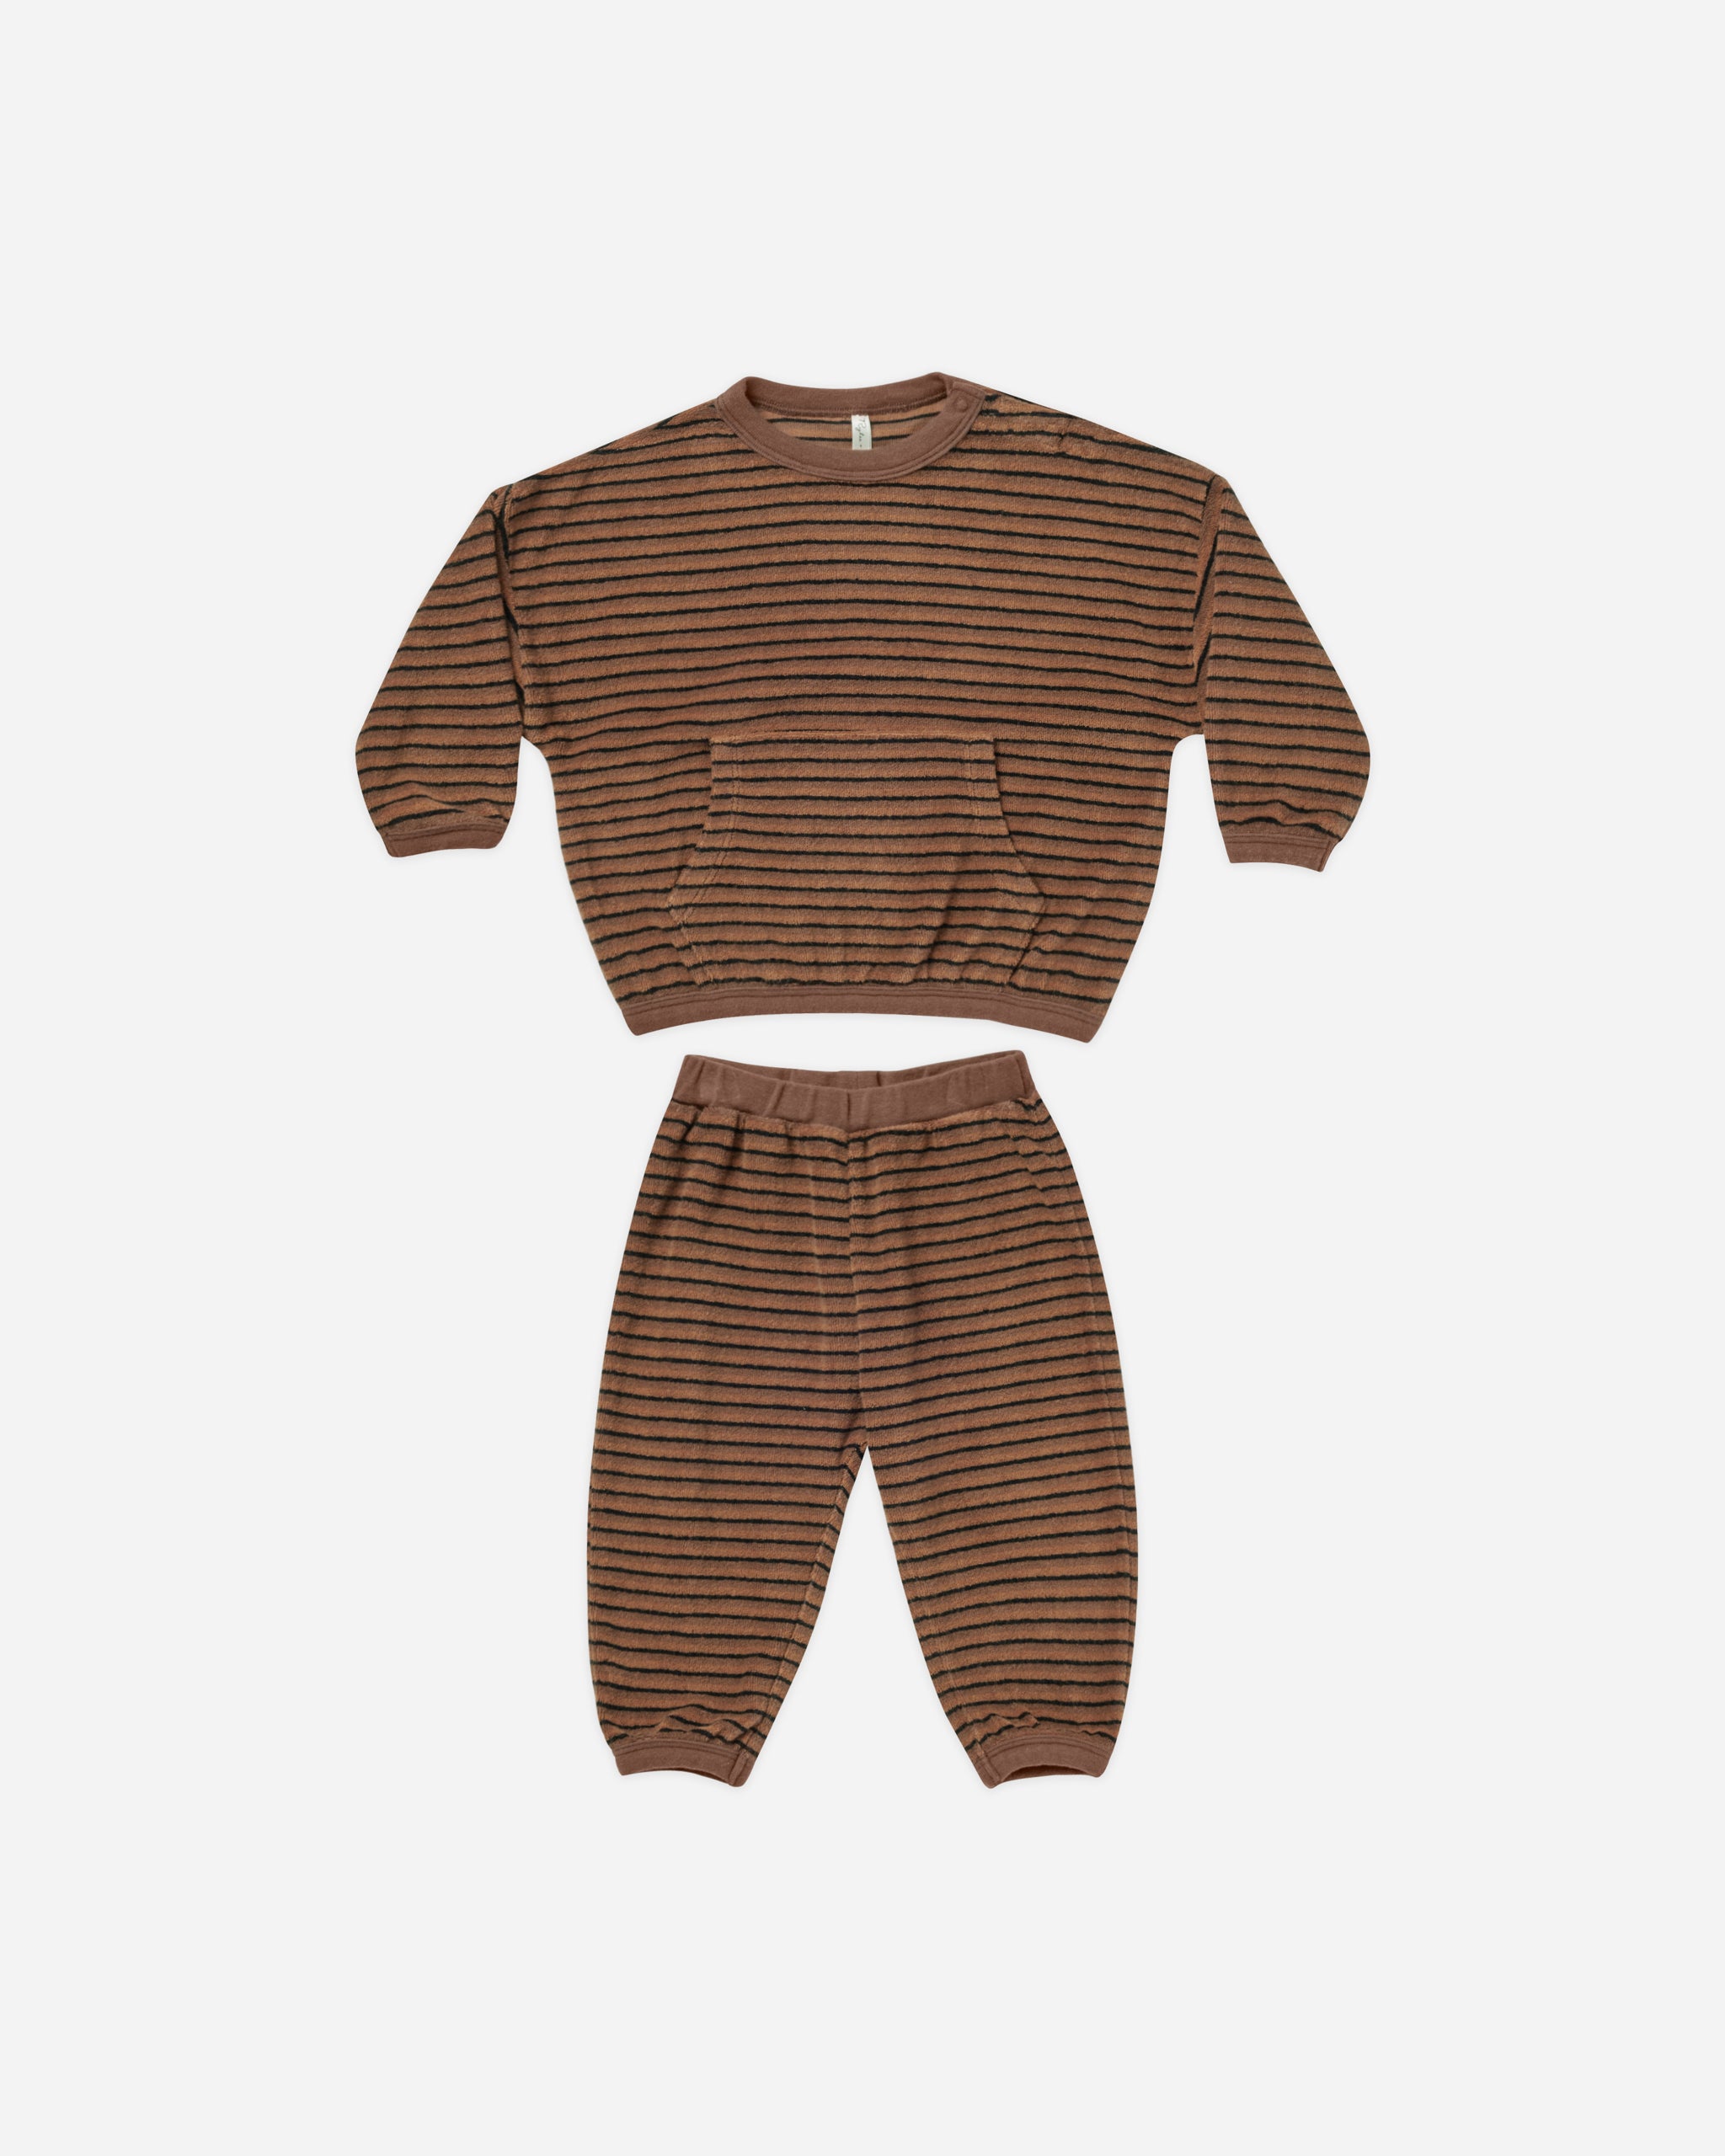 Relaxed Set || Retro Stripe - Rylee + Cru | Kids Clothes | Trendy Baby Clothes | Modern Infant Outfits |